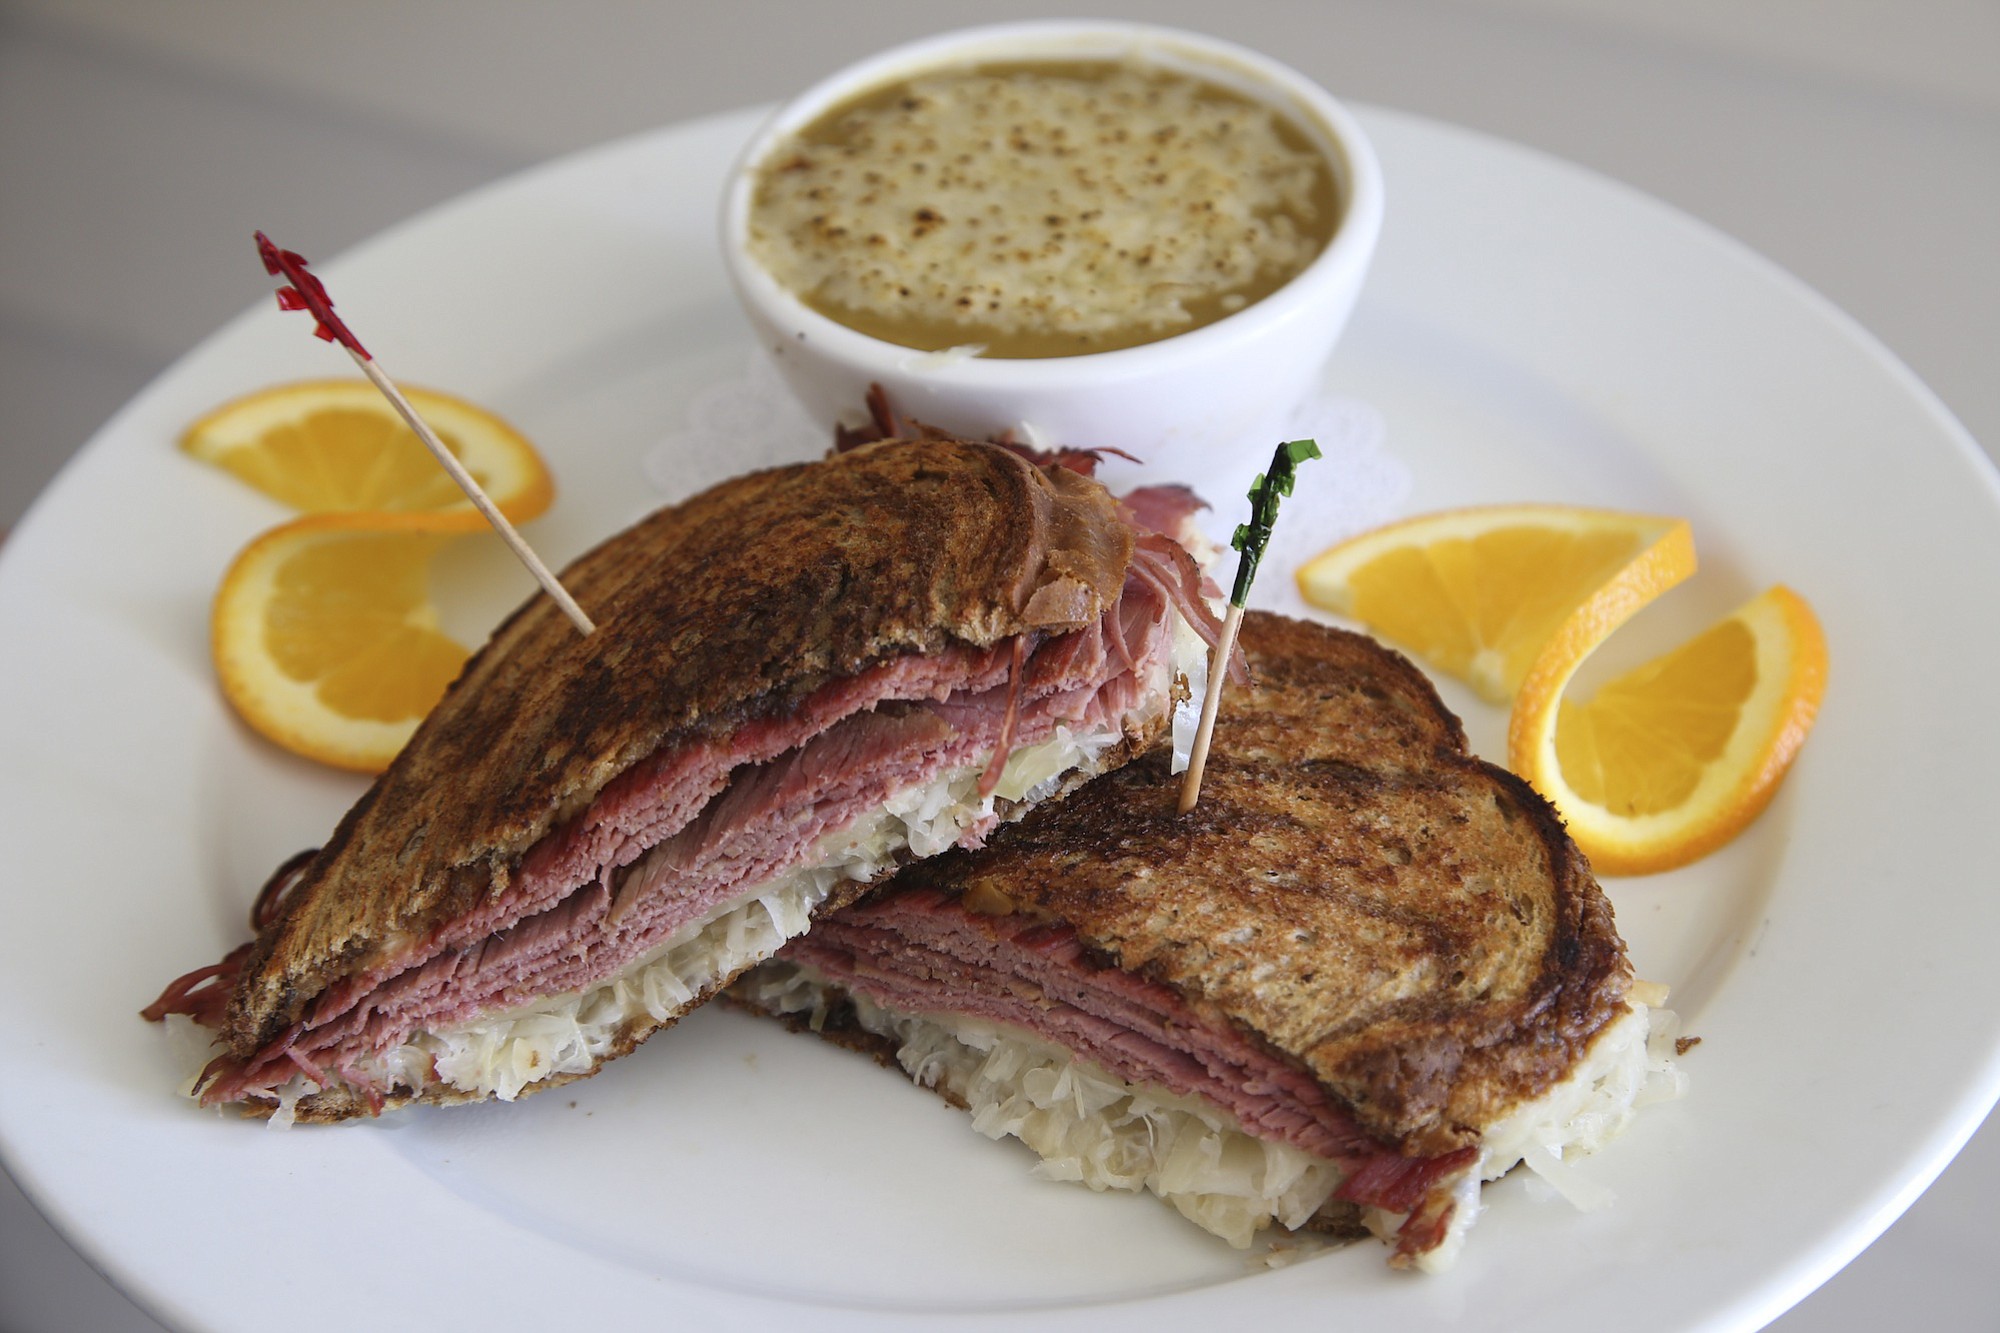 A Reuben sandwich and the soup of the day is served at Shorewood Market